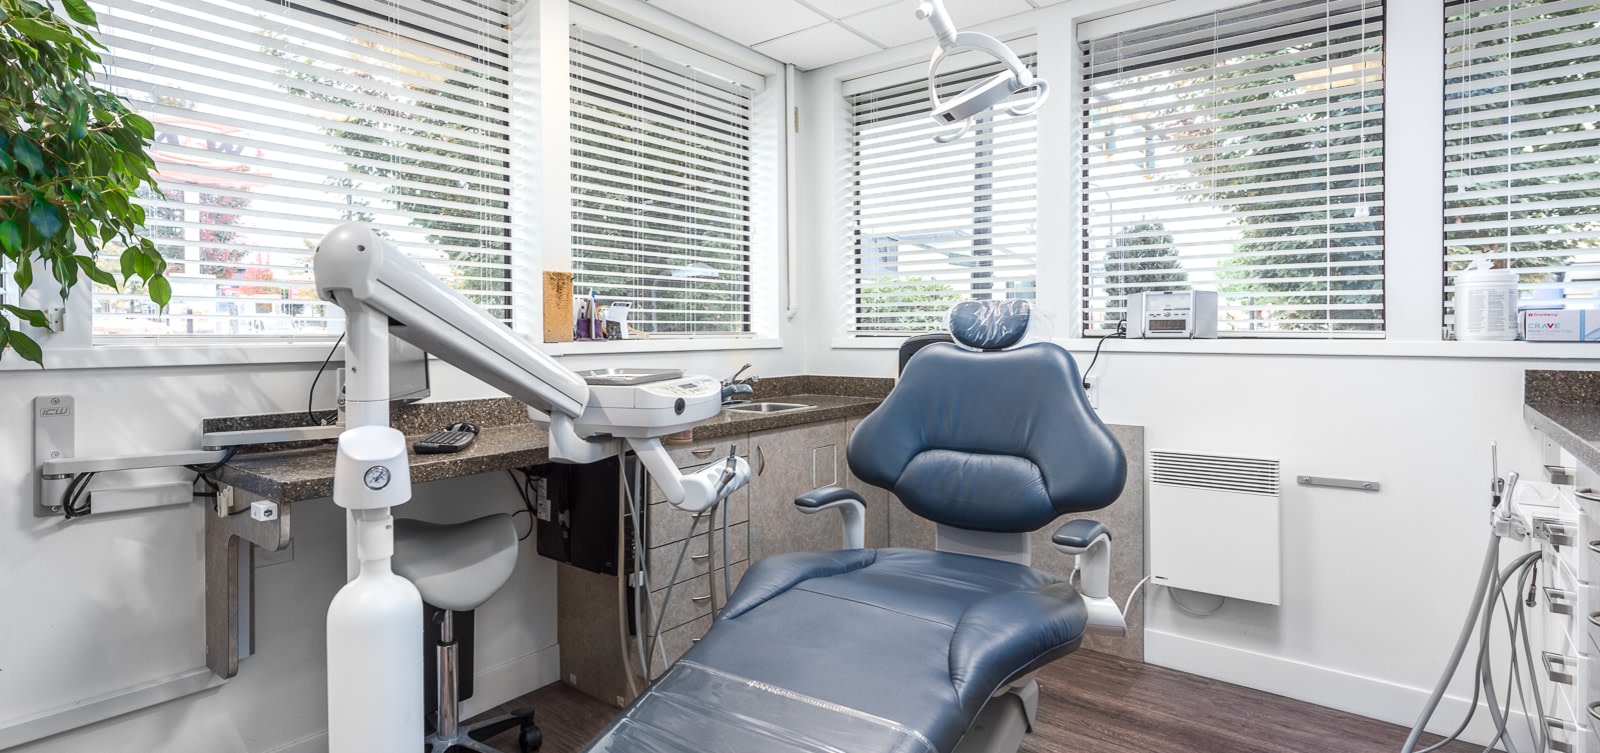 North Burnaby Dental Group in Burnaby, BC